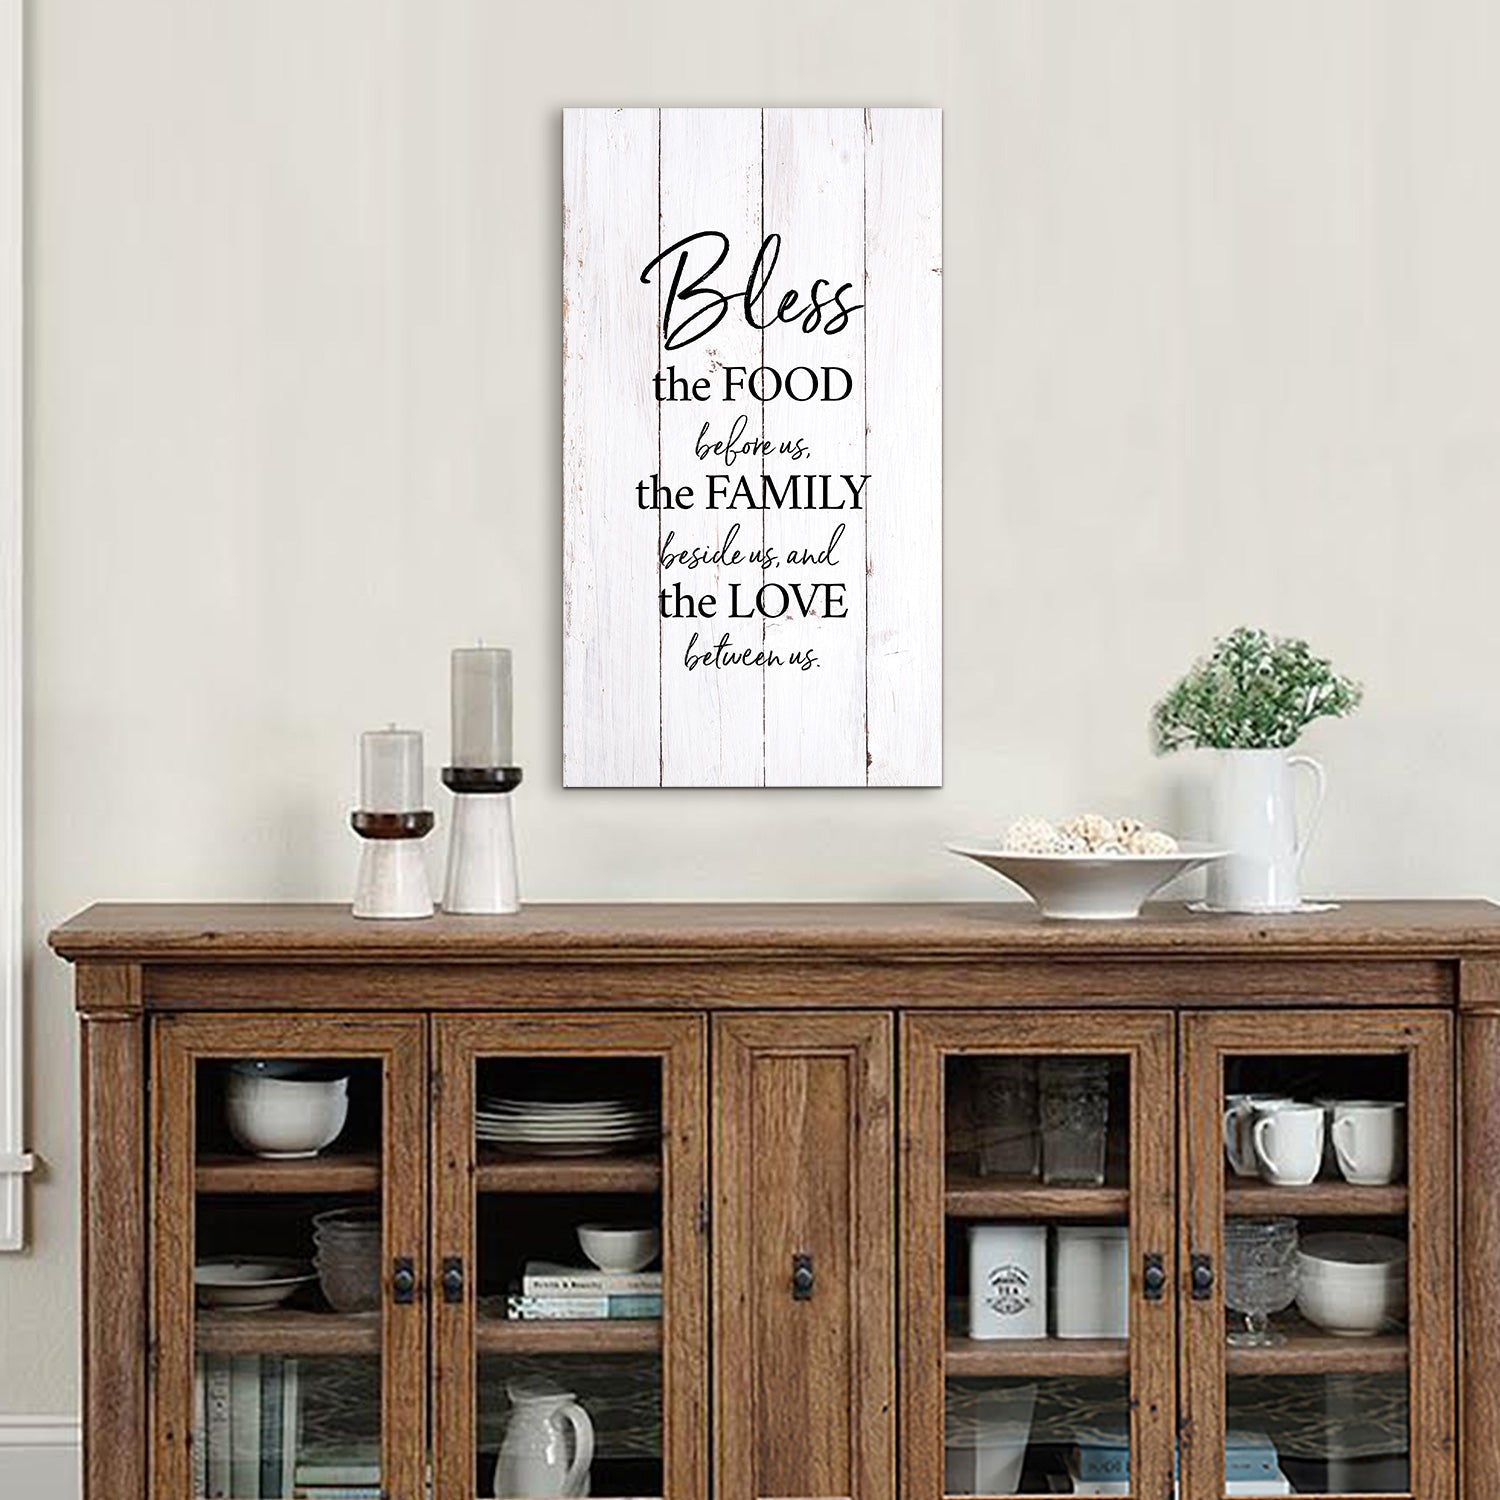 Every Love Story is Beautiful Inspirational Canvas Wall Art Framed Modern Wall Decor Decorative Accents For Walls Ready to Hang for Home Living Room Bedroom Entryway Kitchen Office Size 20” x 40” - LifeSong Milestones